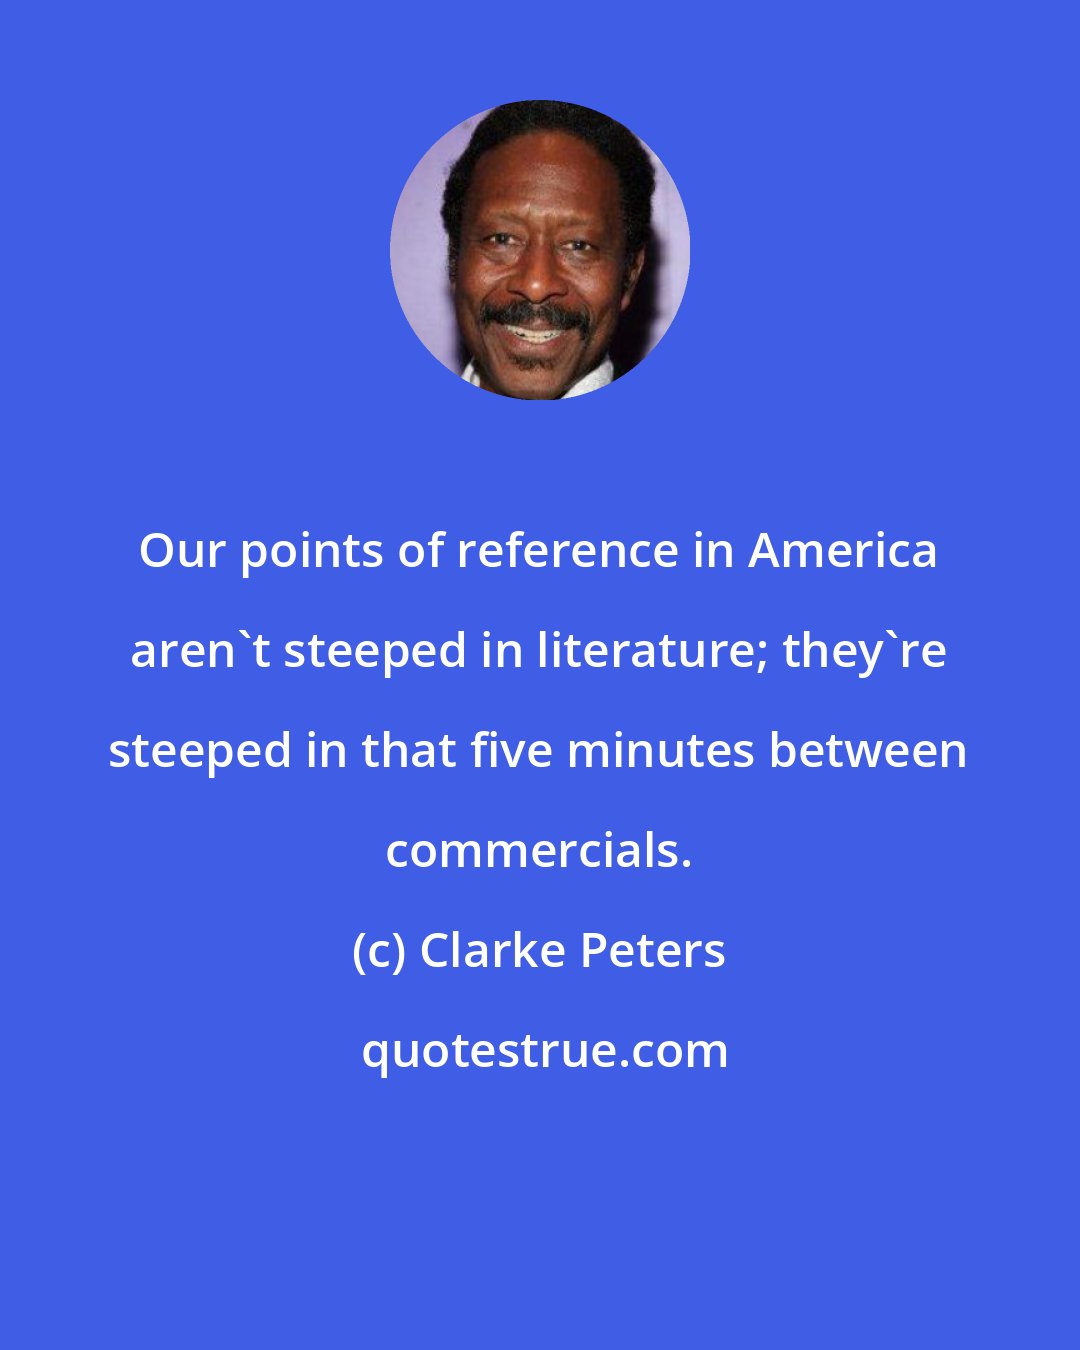 Clarke Peters: Our points of reference in America aren't steeped in literature; they're steeped in that five minutes between commercials.